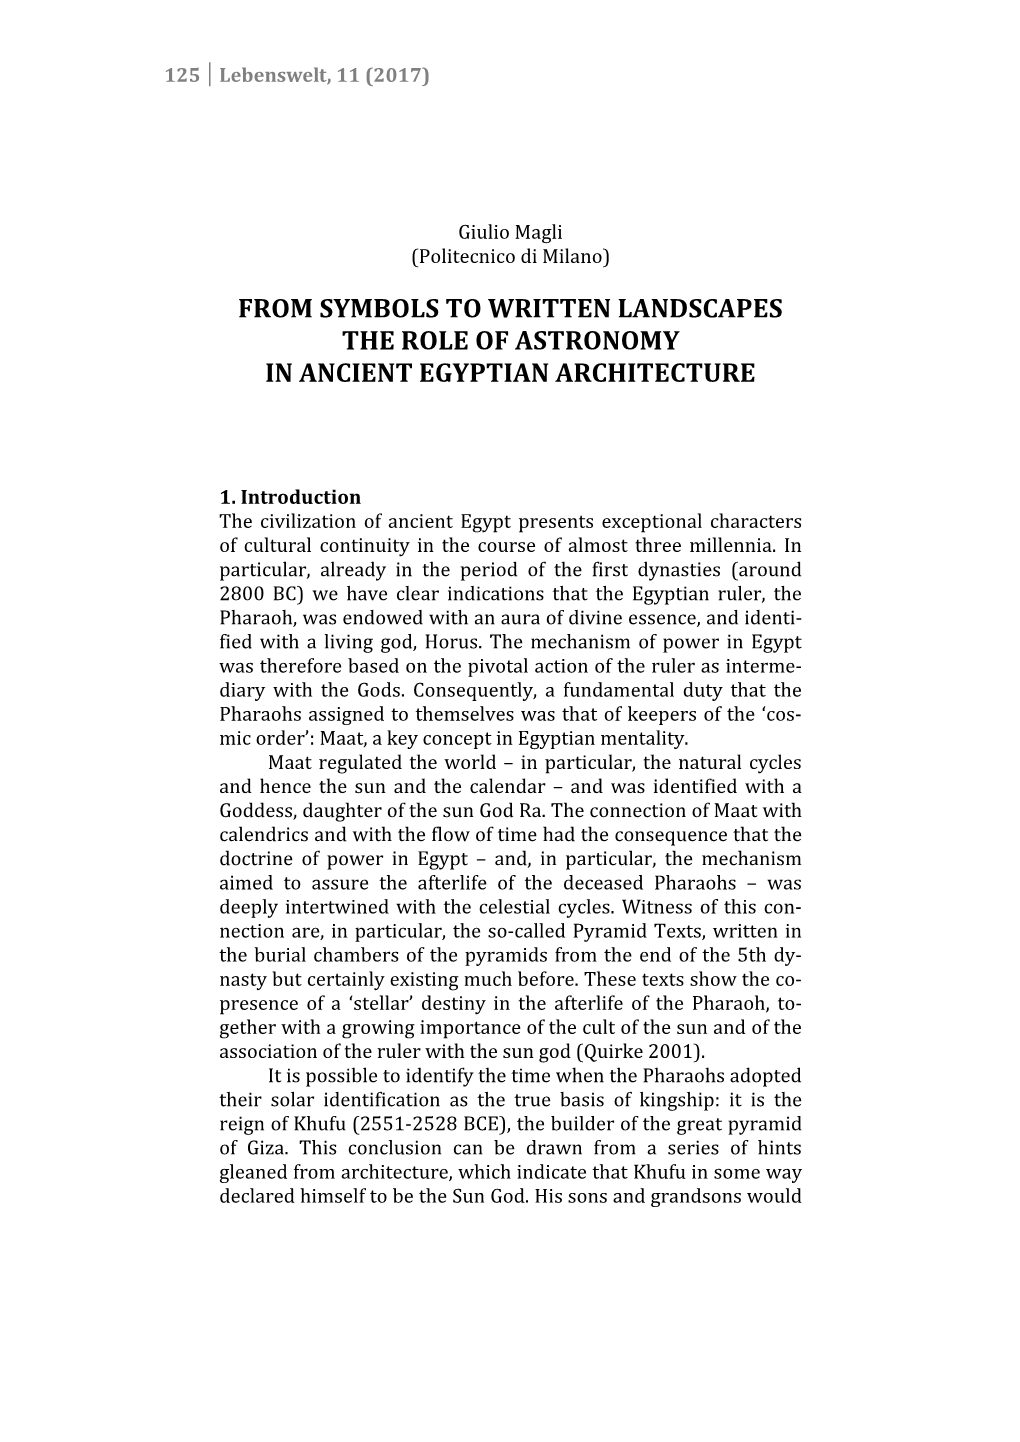 From Symbols to Written Landscapes the Role of Astronomy in Ancient Egyptian Architecture